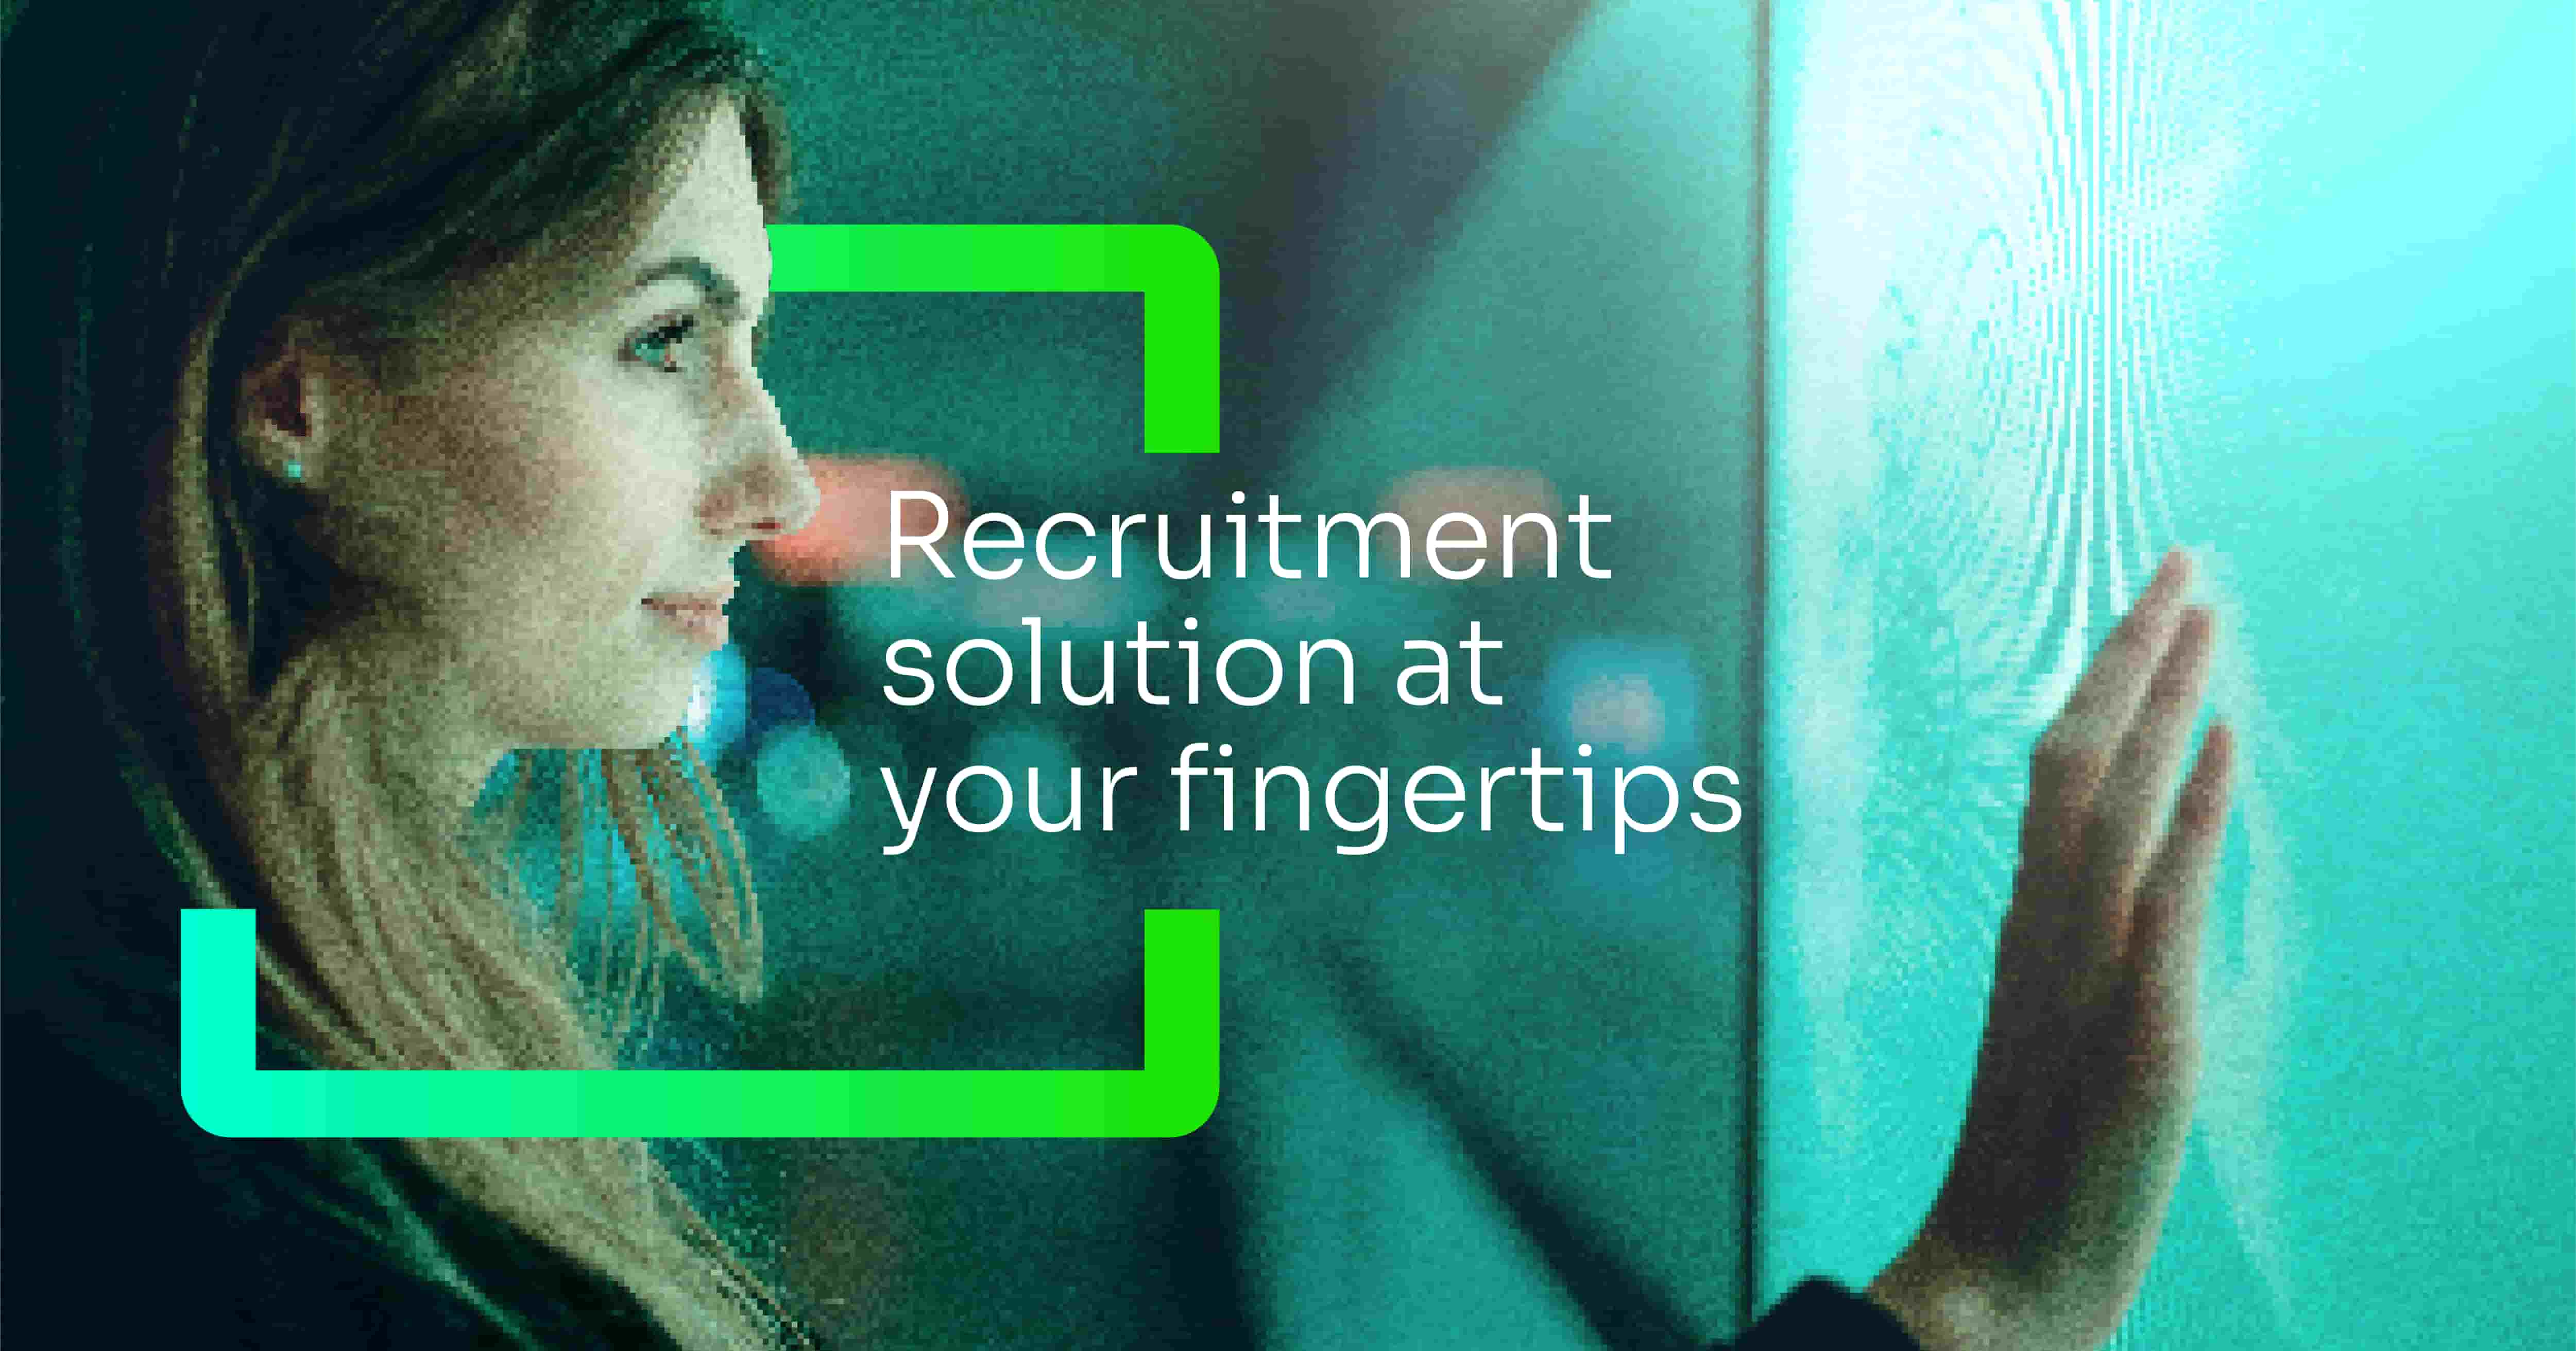 Recruitment solution at your fingertips